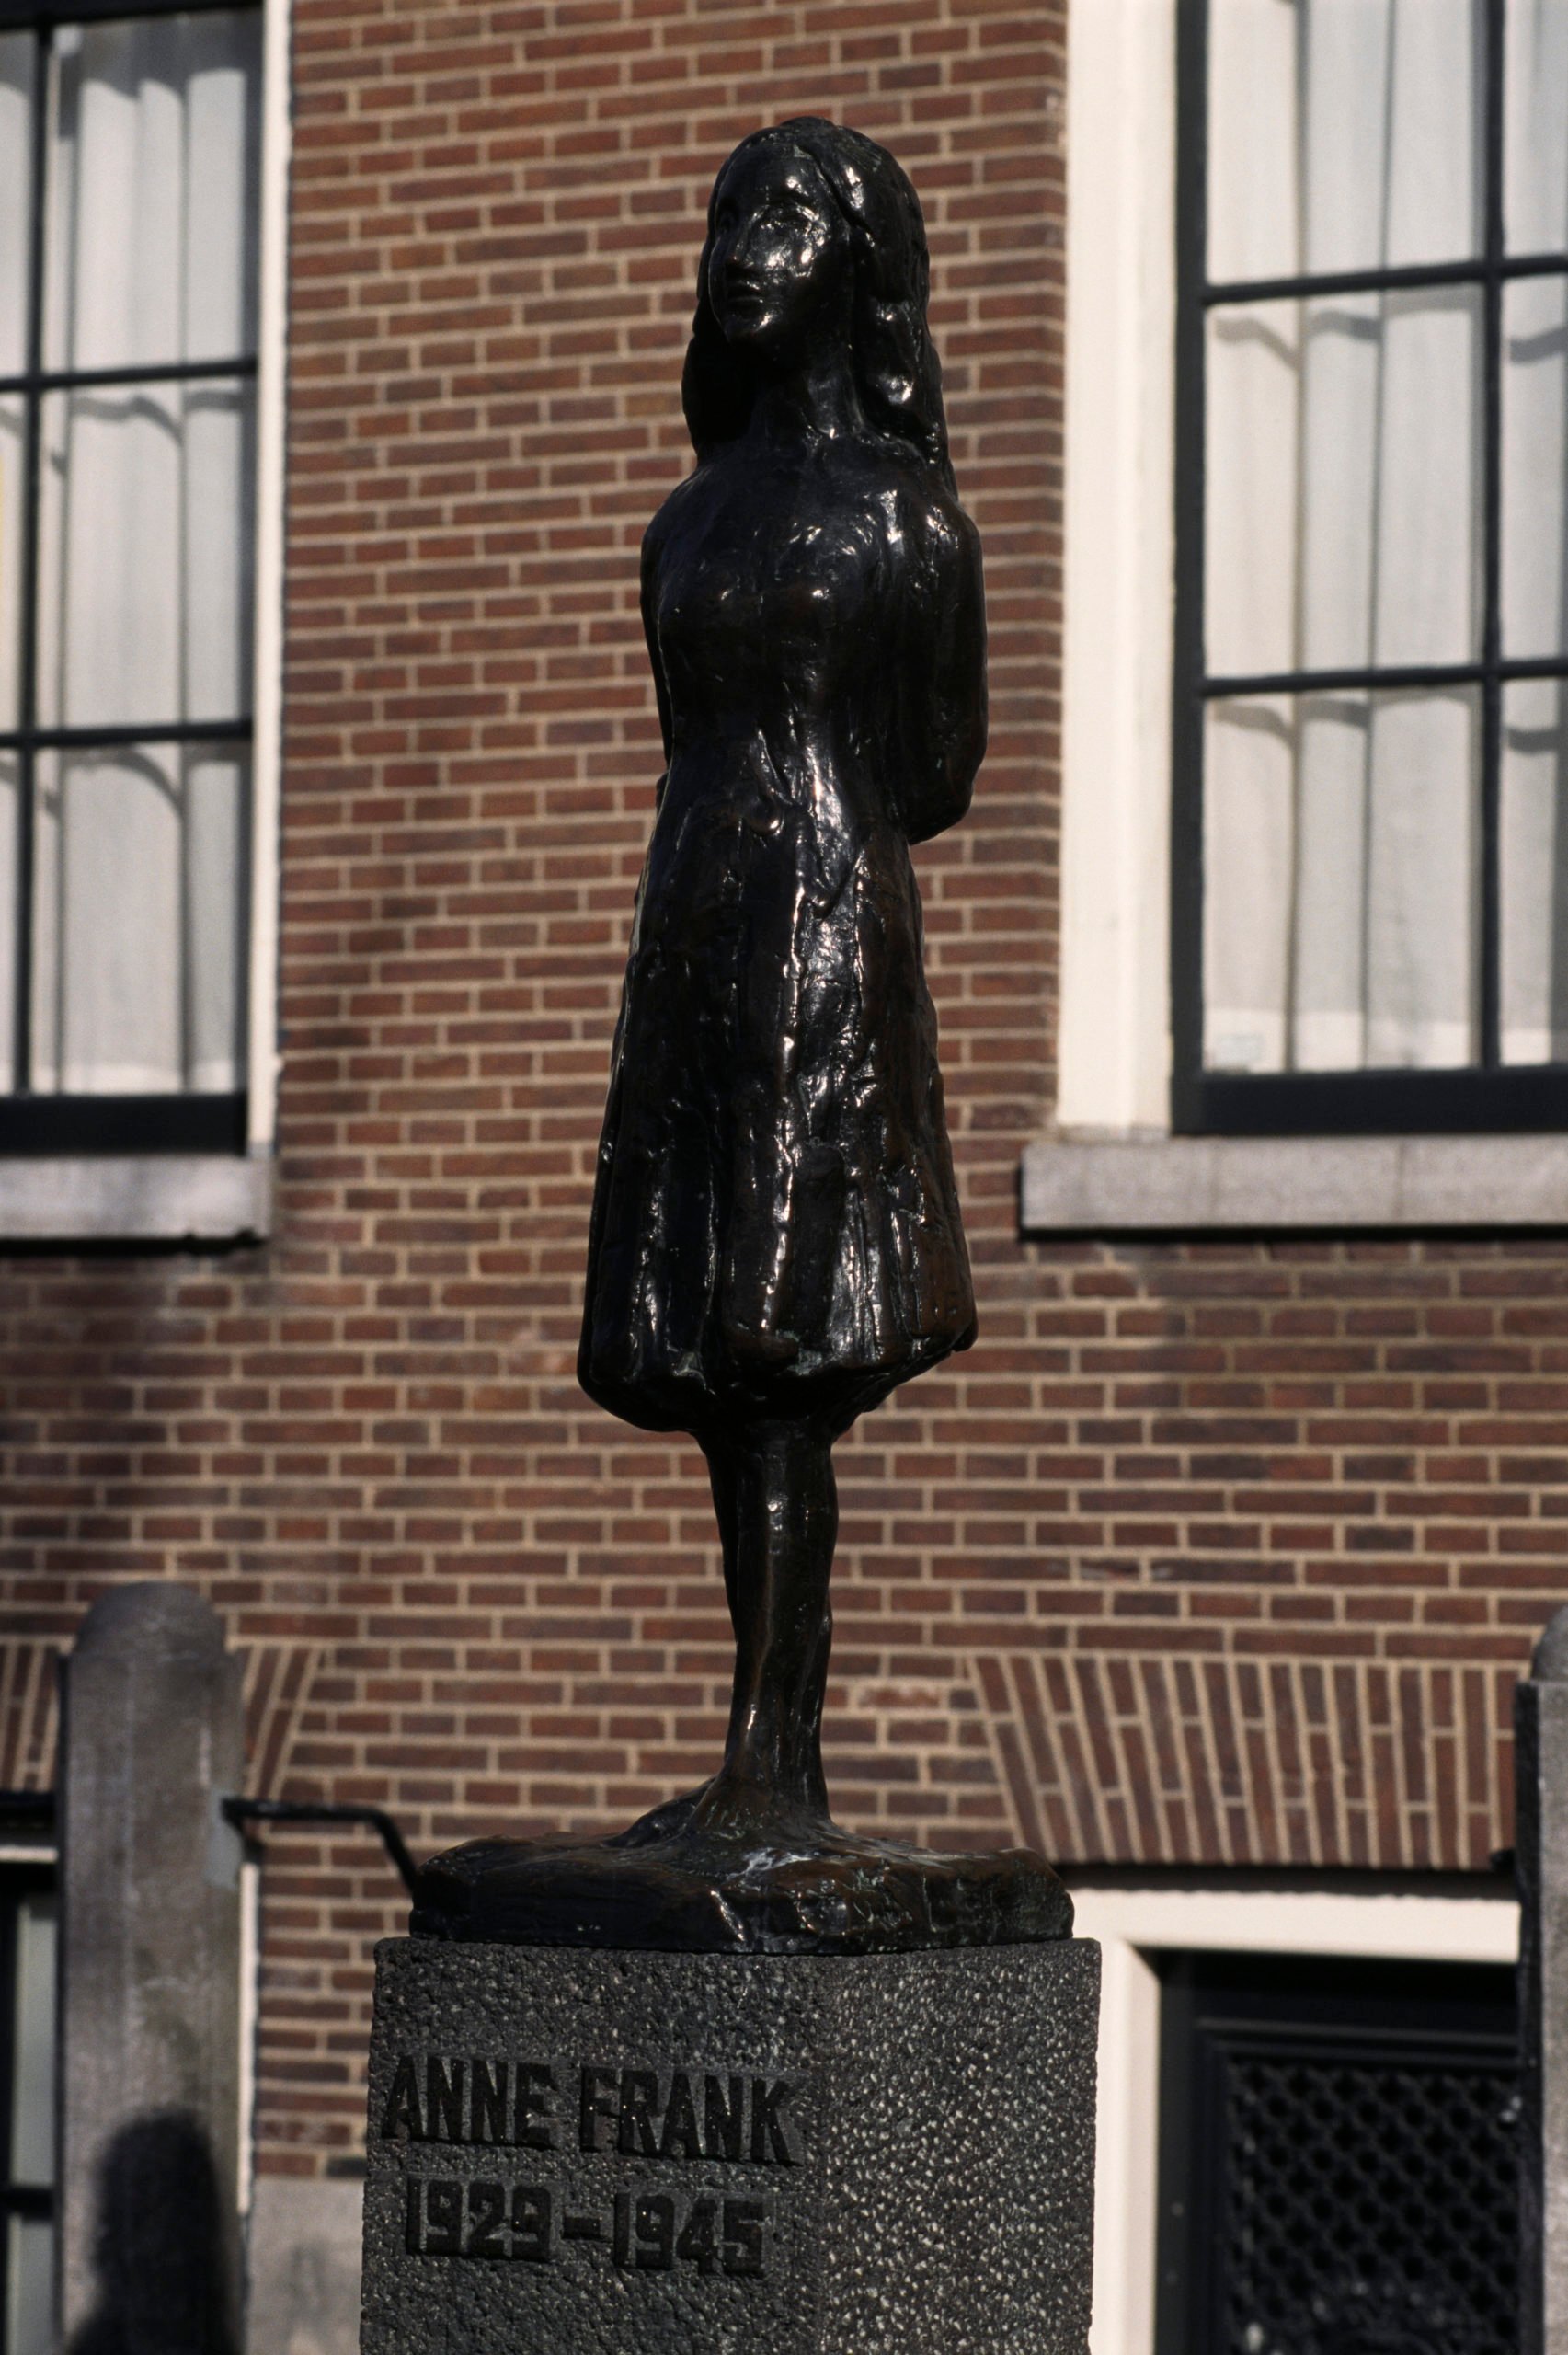 A statue of Anne Frank in Westermarkt, near the house where Anne Frank and her family hid during the war. | Located in: Westermarkt. (Photo by David Lefranc/Kipa/Sygma via Getty Images)